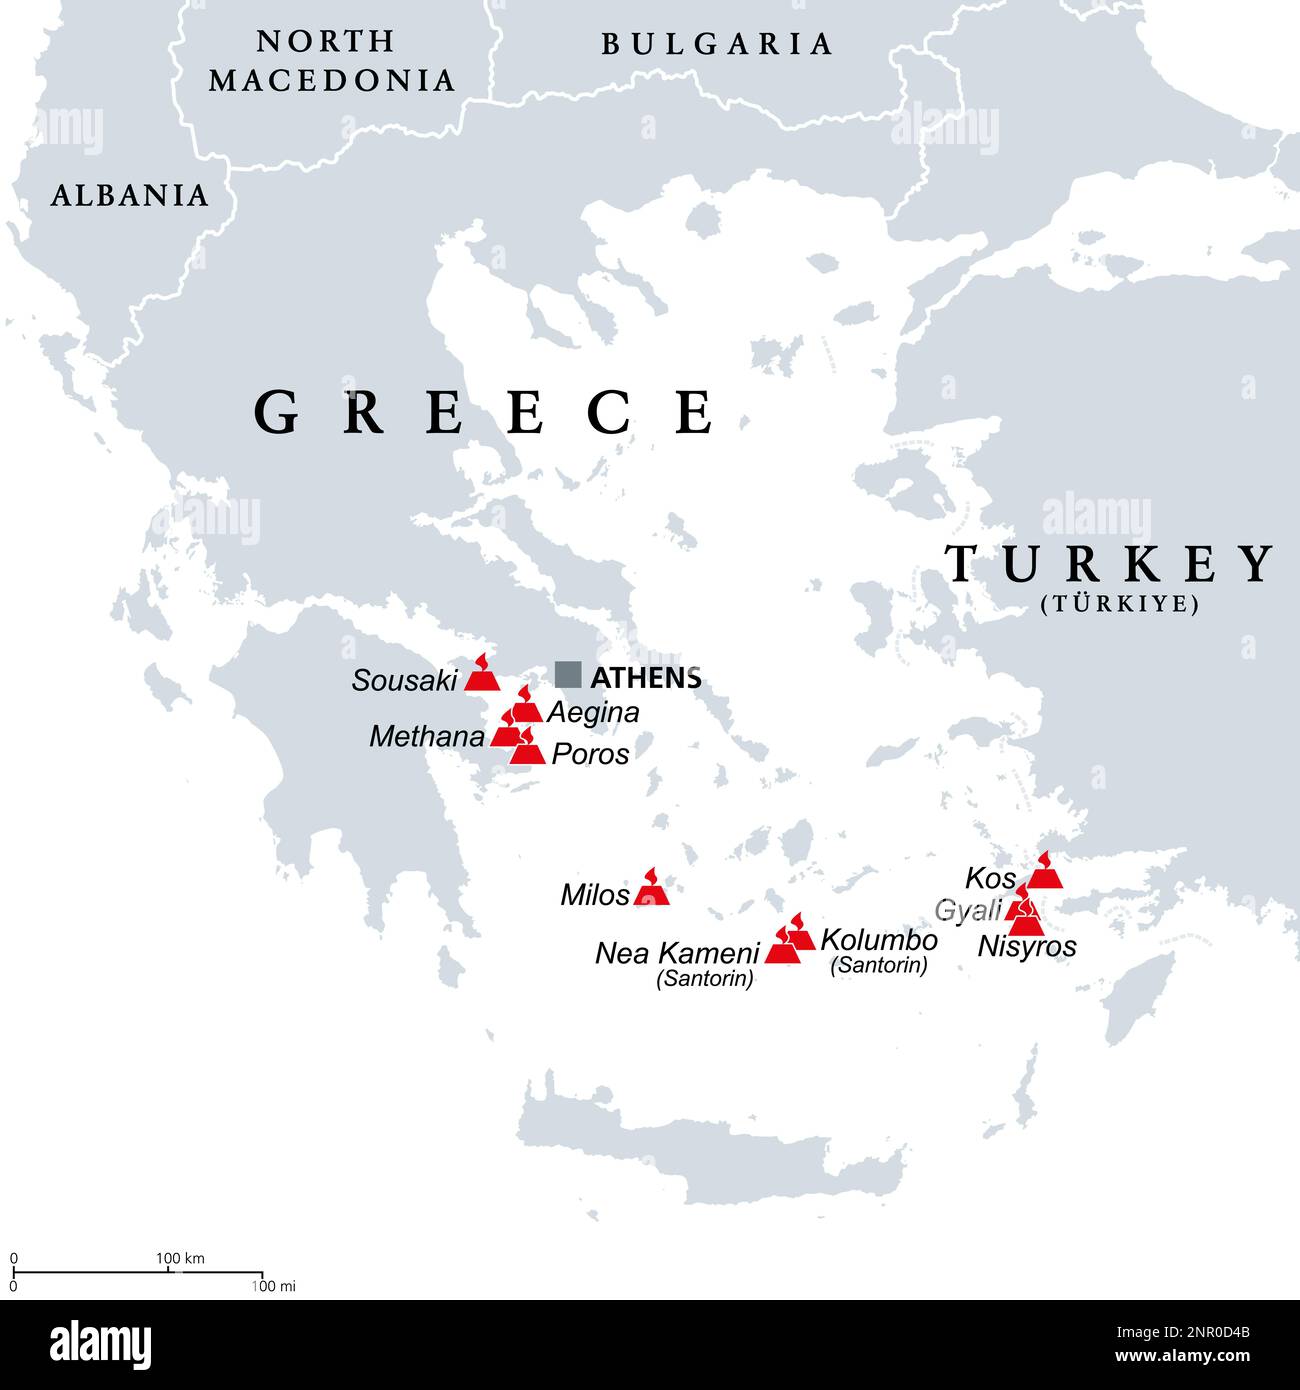 Greece, active and extinct volcanoes in the Aegean Sea region, political map. The latest eruption occured on the Greek island Santorini. Stock Photo